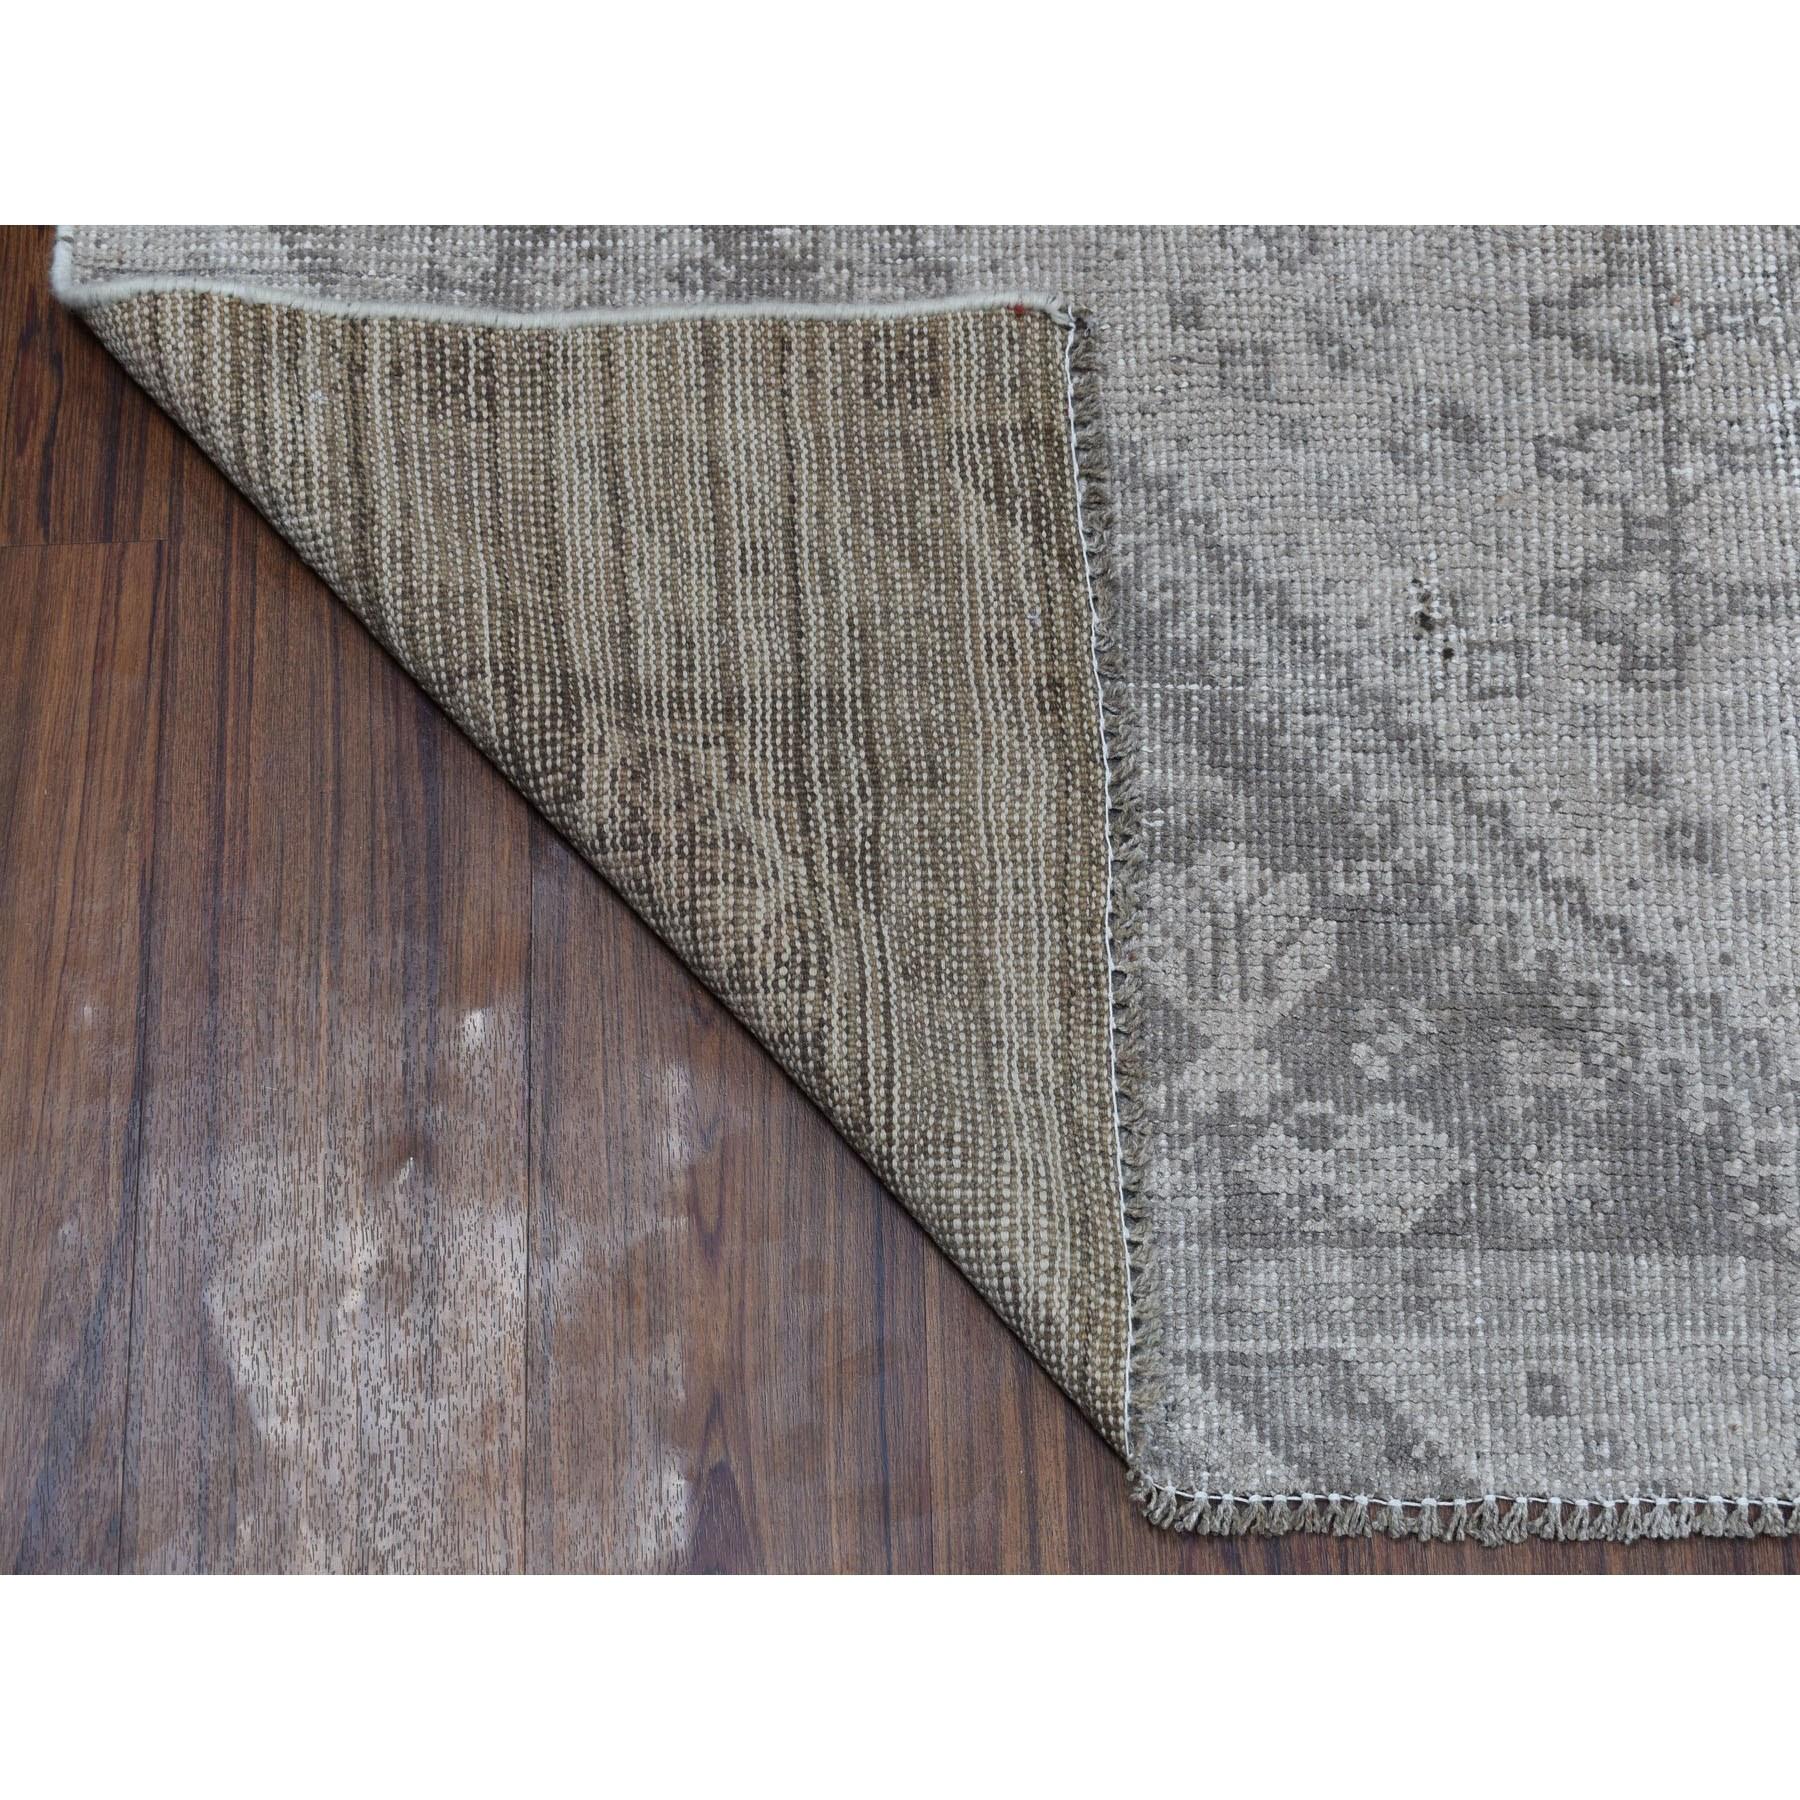 This fabulous hand-knotted carpet has been created and designed for extra strength and durability. This rug has been handcrafted for weeks in the traditional method that is used to make
Exact Rug Size in Feet and Inches : 4'10